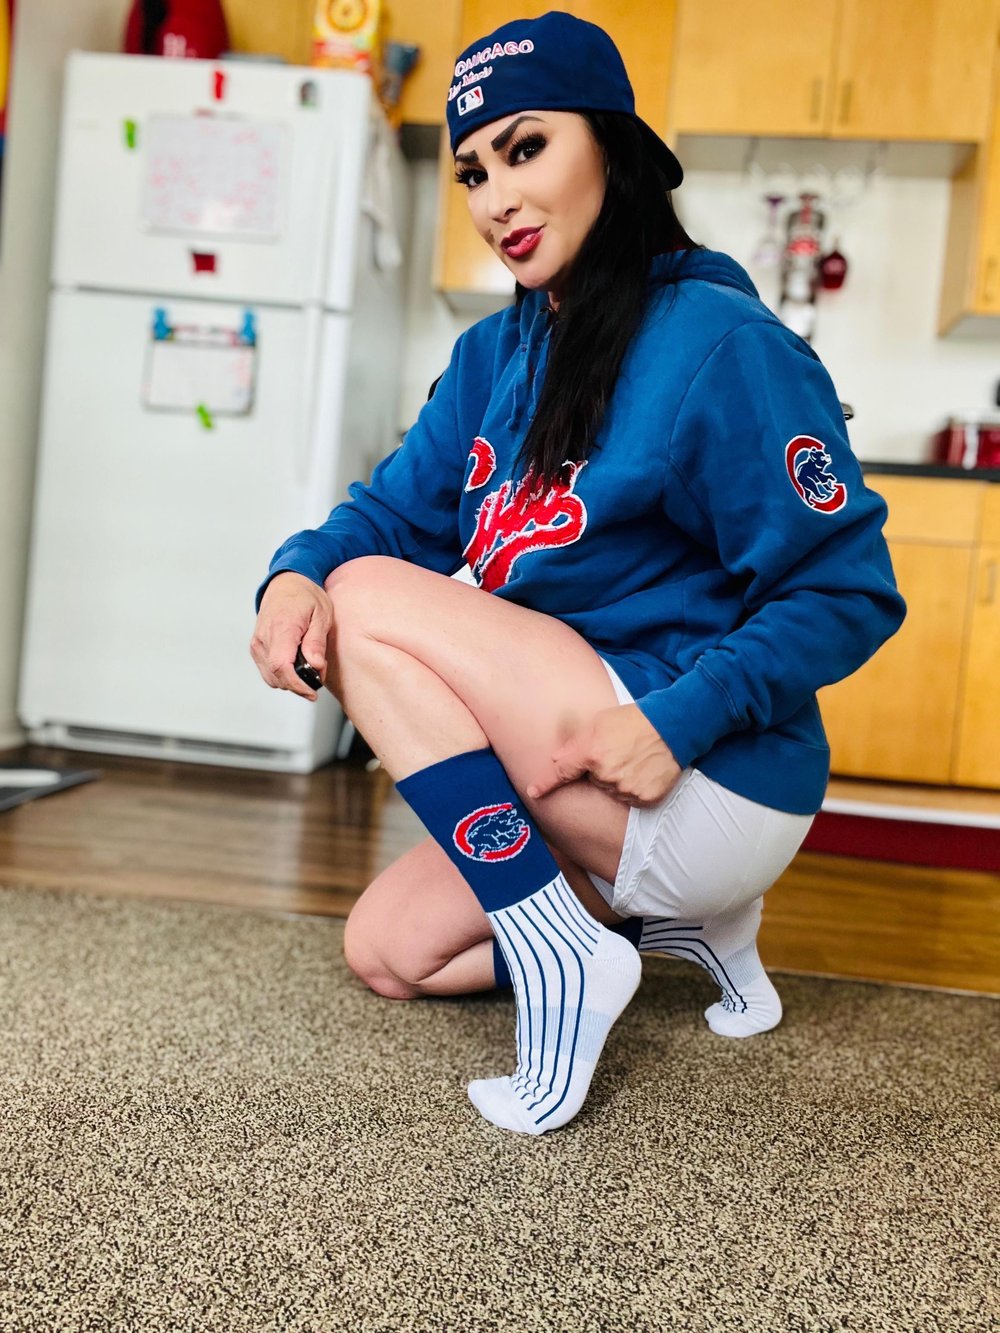 Chicago Cubs Sweatshirt, Cubs Socks & White Shorts + Free Signed 8X10